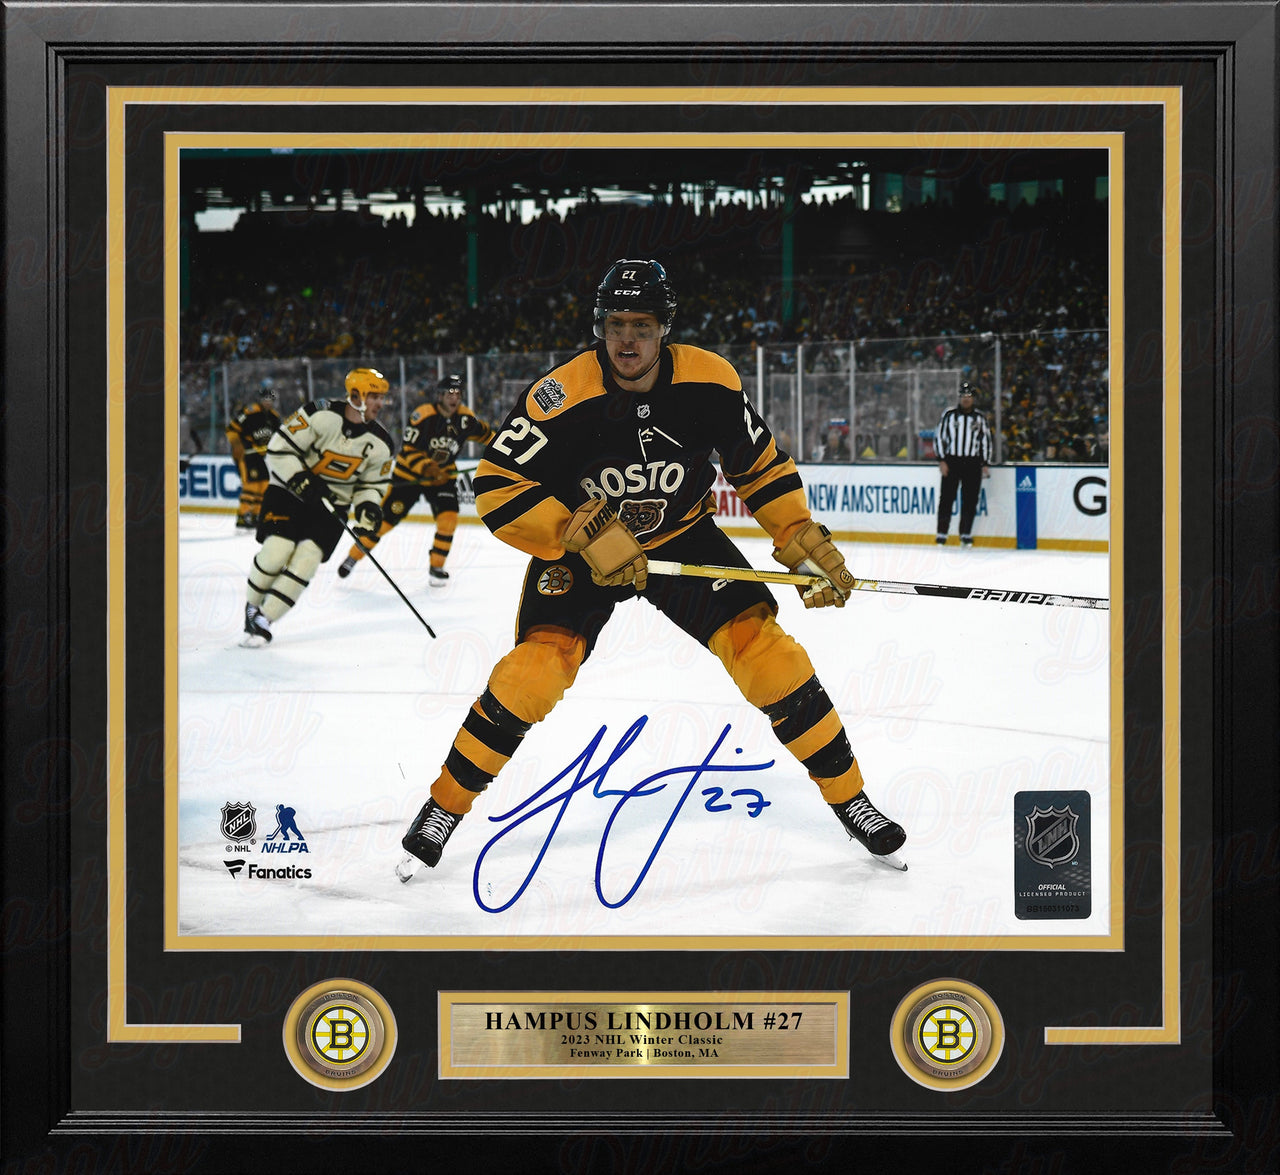 Hampus Lindholm 2023 Winter Classic Action Boston Bruins Autographed Framed Hockey Photo - Dynasty Sports & Framing 